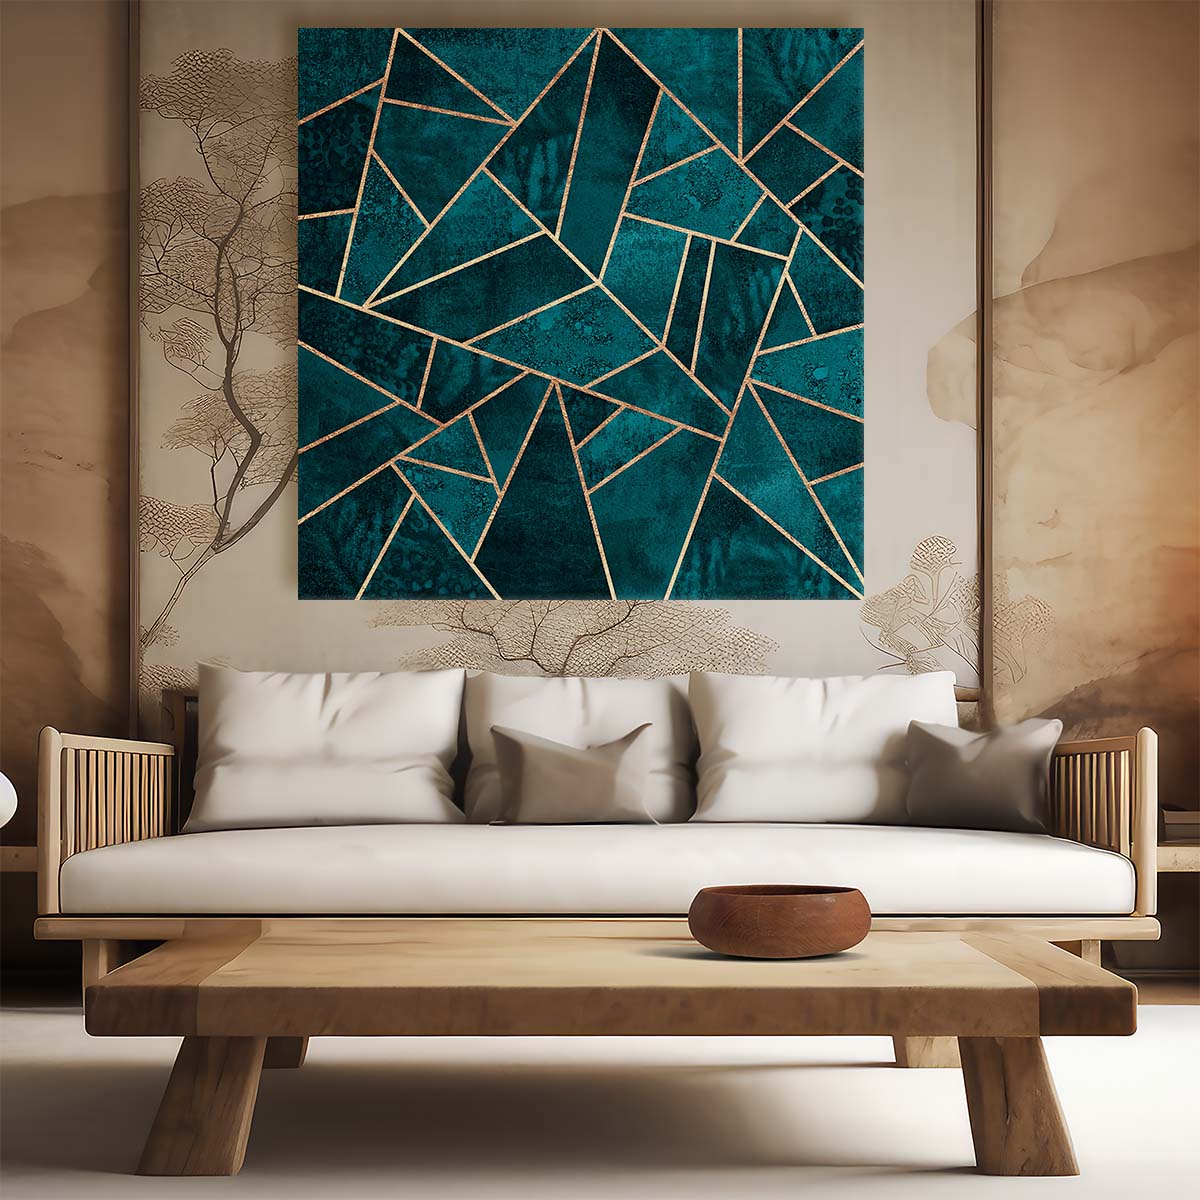 Abstract Geometric Illustration in Teal & Gold Wall Art by Luxuriance Designs. Made in USA.